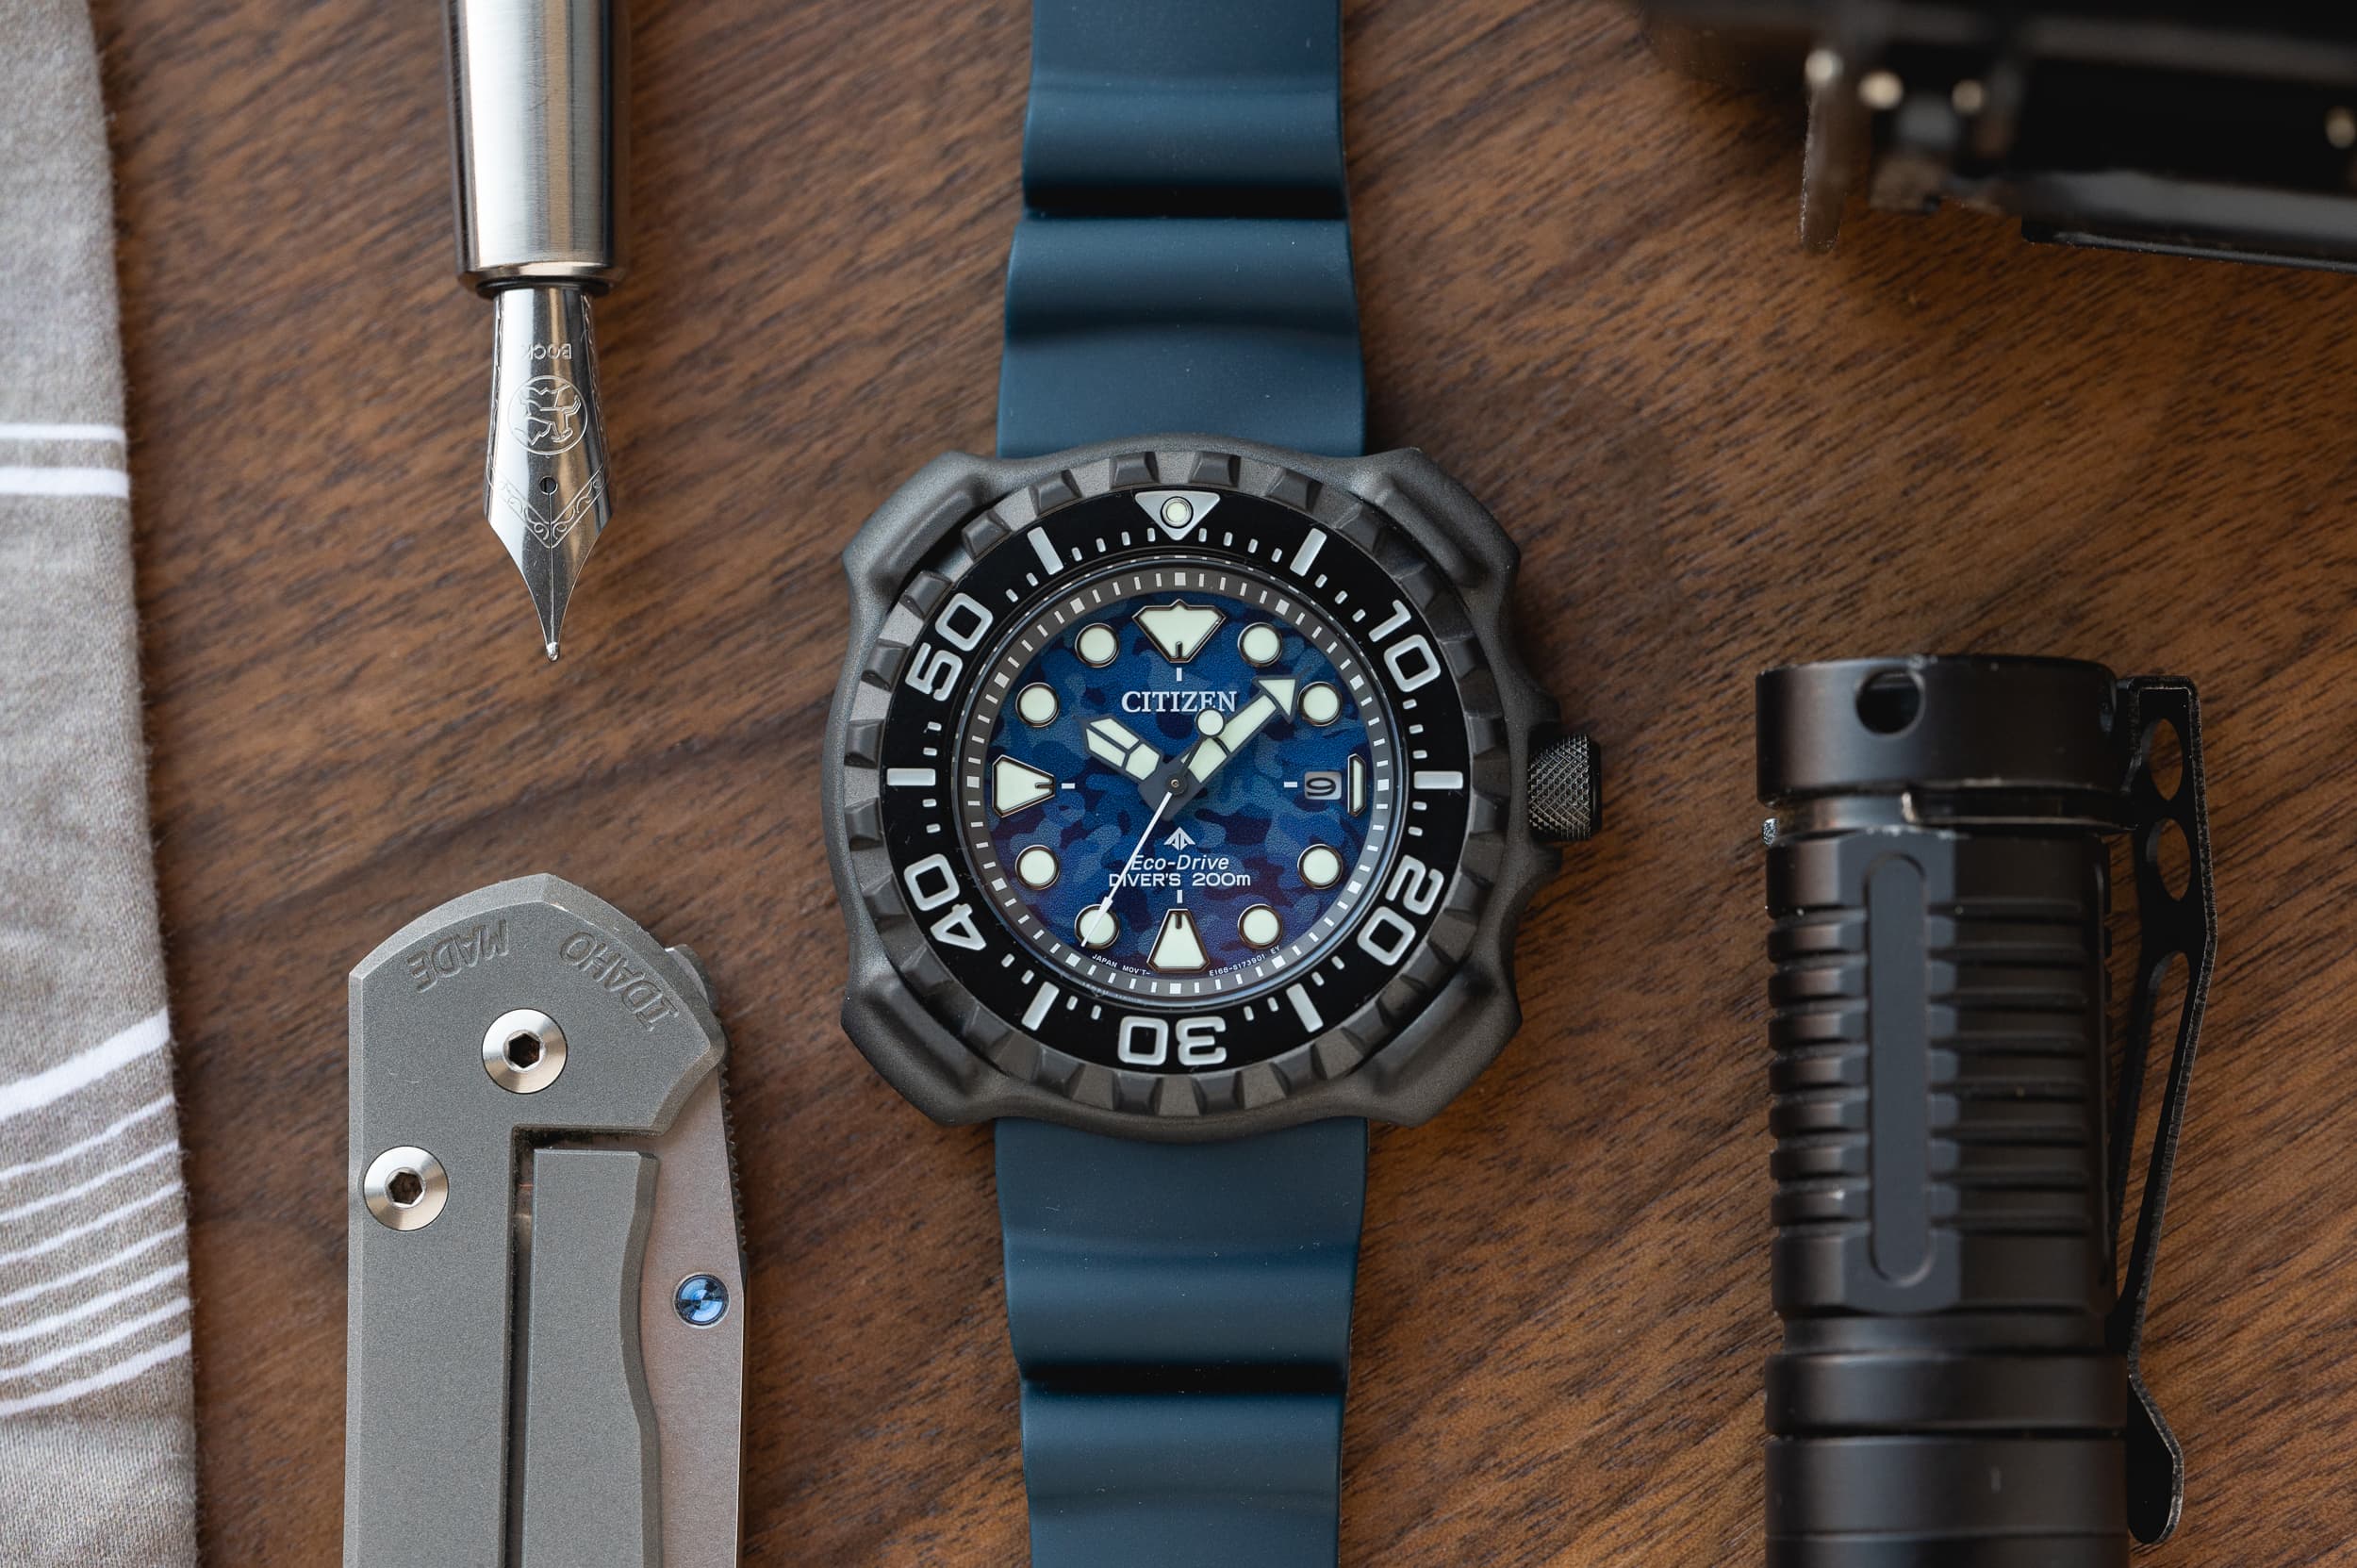 The Yet Assertive Wound Diver Review: Citizen Promaster & Approachable Worn BN0227-09L -